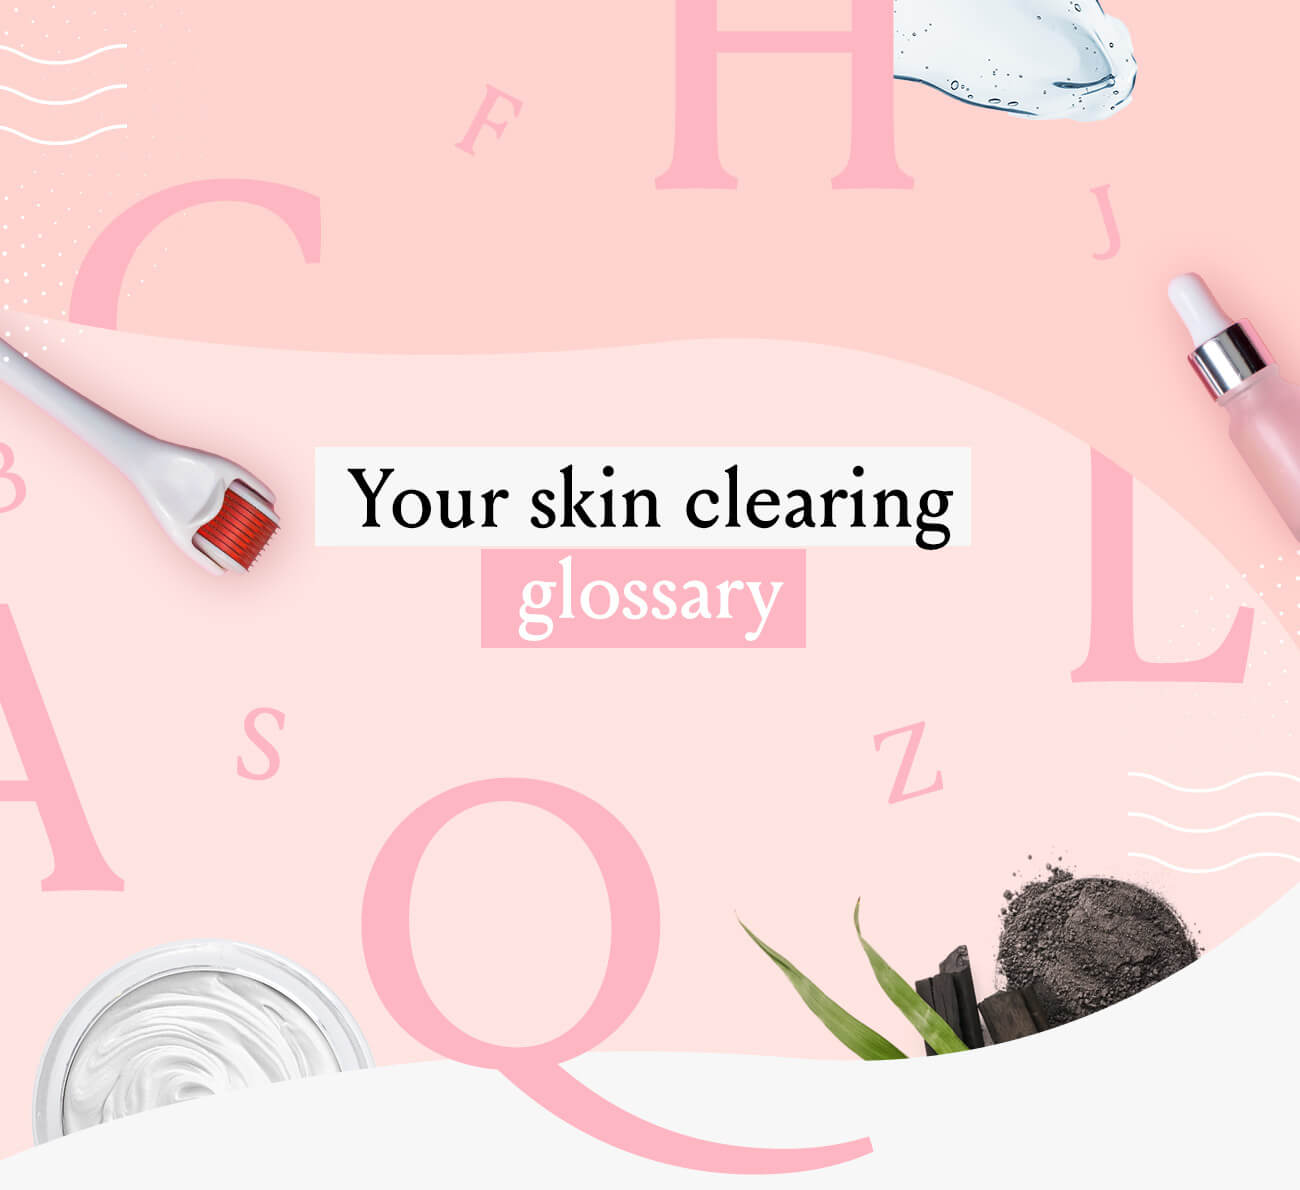 Your skin clearing glossary